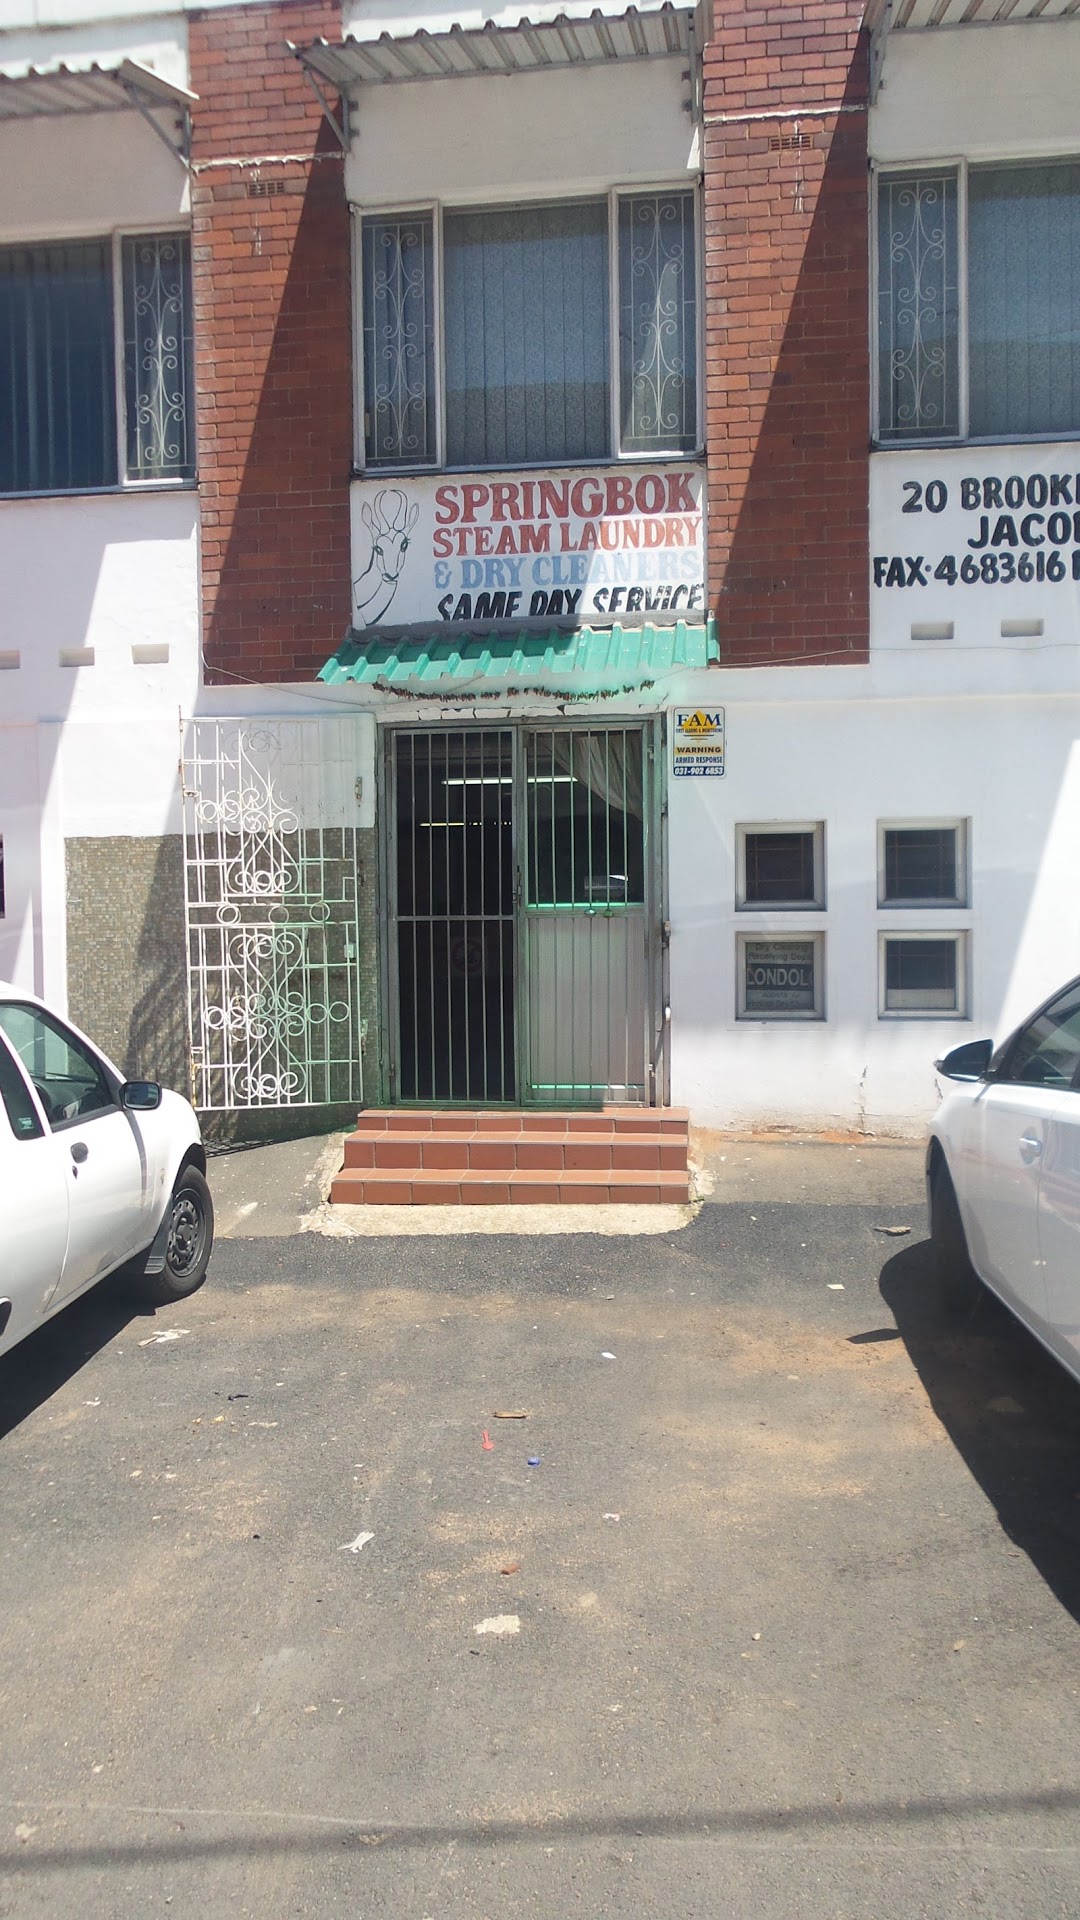 SPRINGBOK STEAM LAUNDRY & DRY CLEANERS